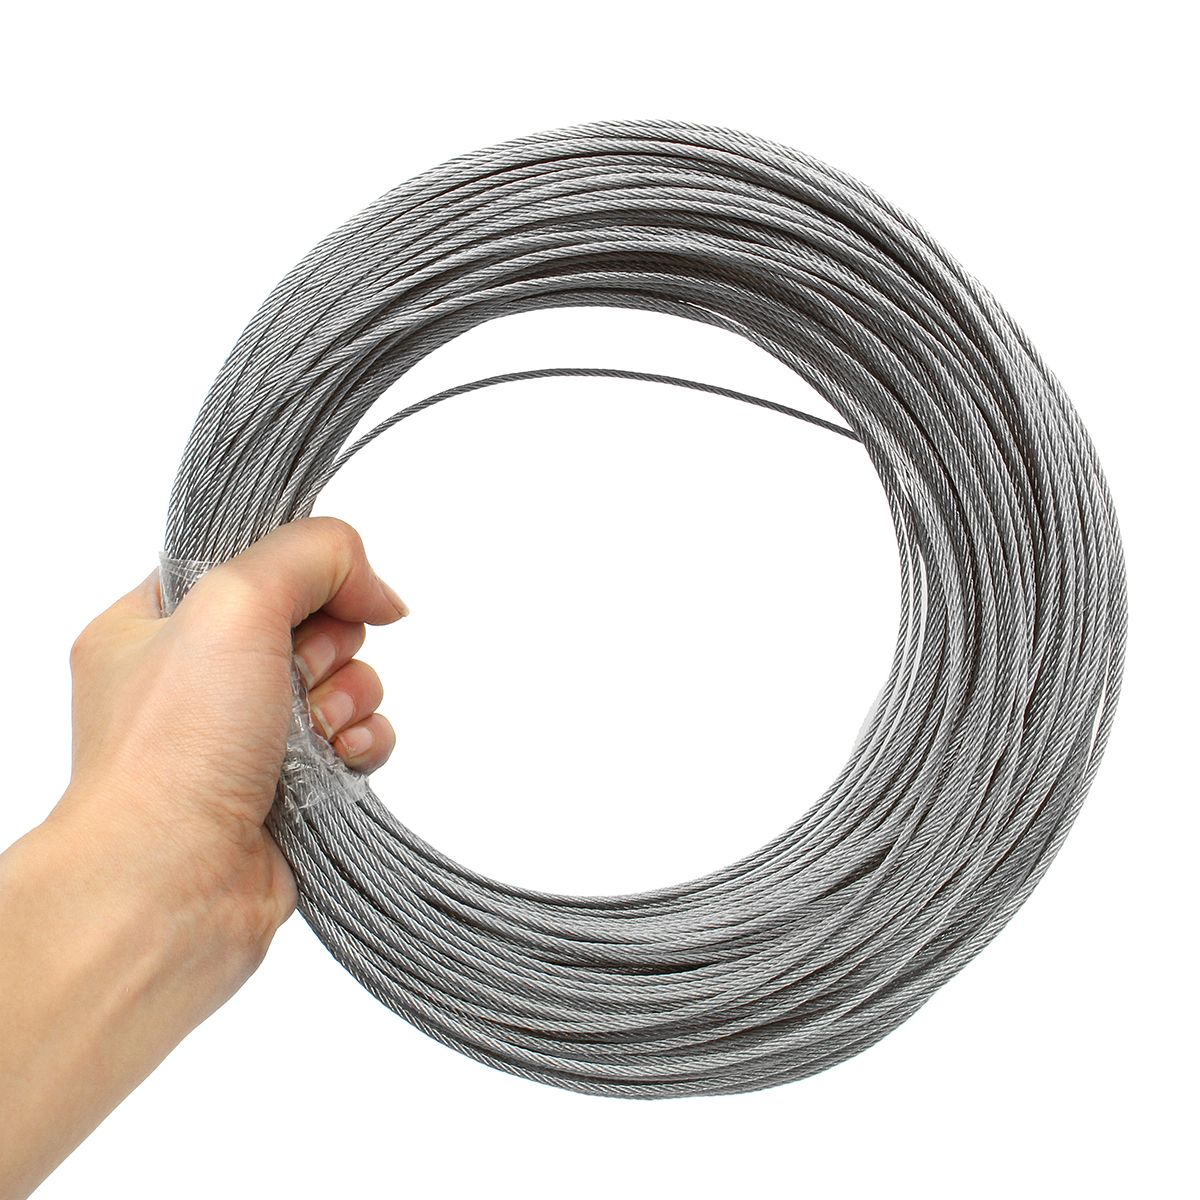 15mm-Stainless-Steel-Wire-Rope-Tensile-Diameter-Structure-Cable-1256988